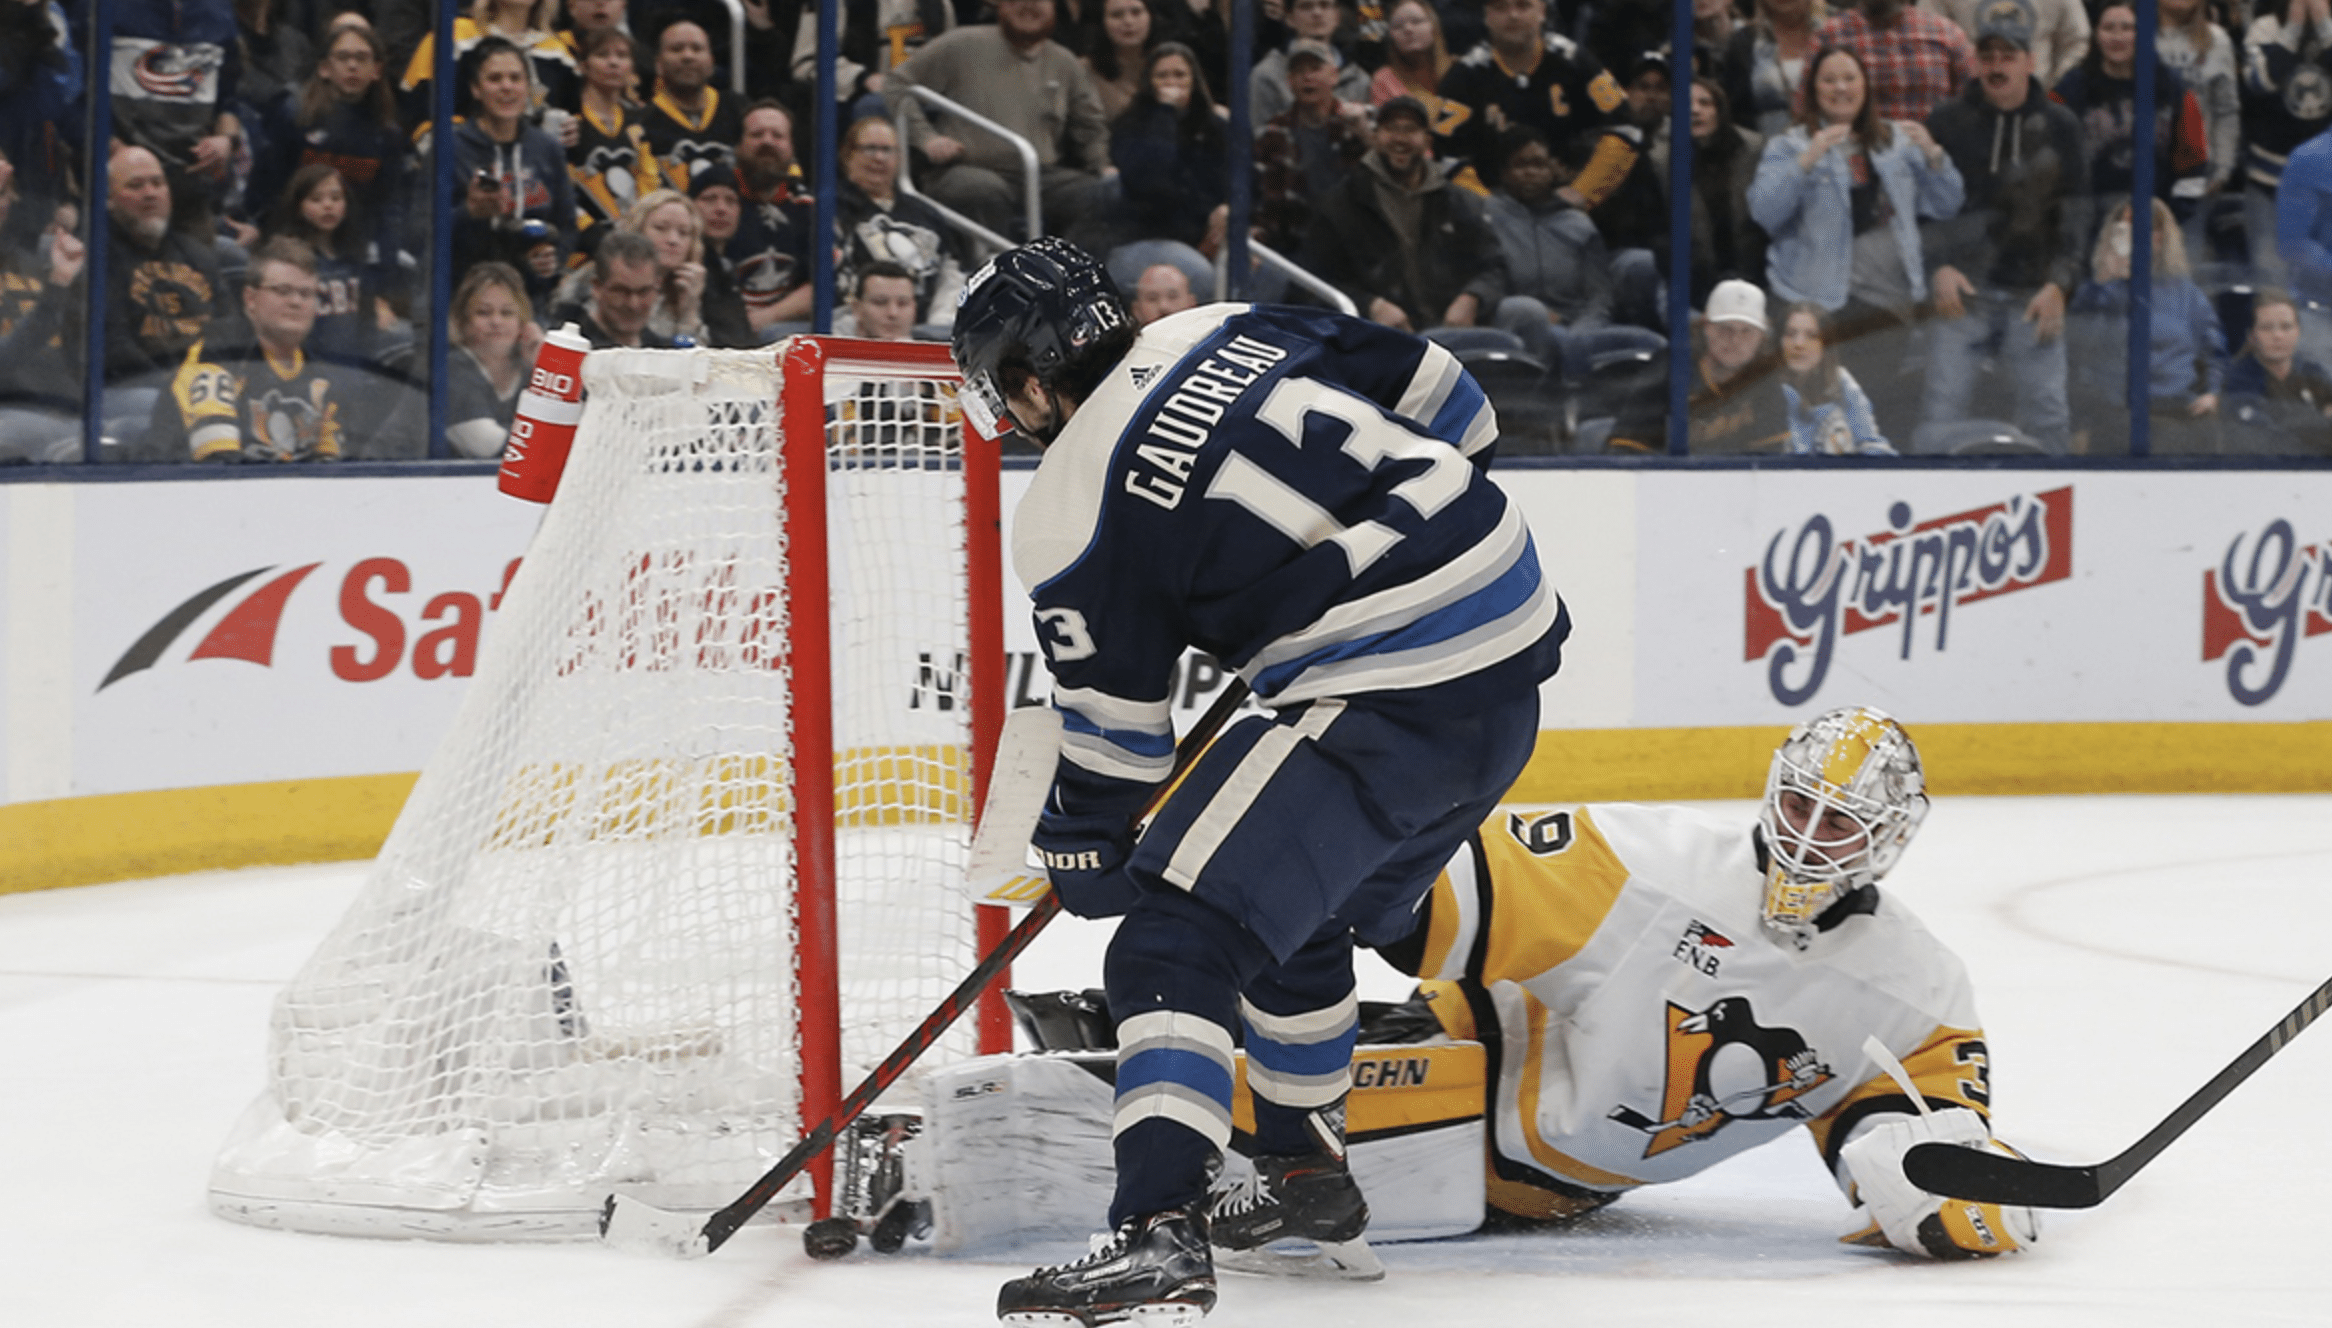 Pittsburgh Penguins goalie Alex Nedeljkovic (39) makes a save on the shot attempt of Columbus Blue Jackets left wing Johnny Gaudreau (13) during overtime at Nationwide Arena